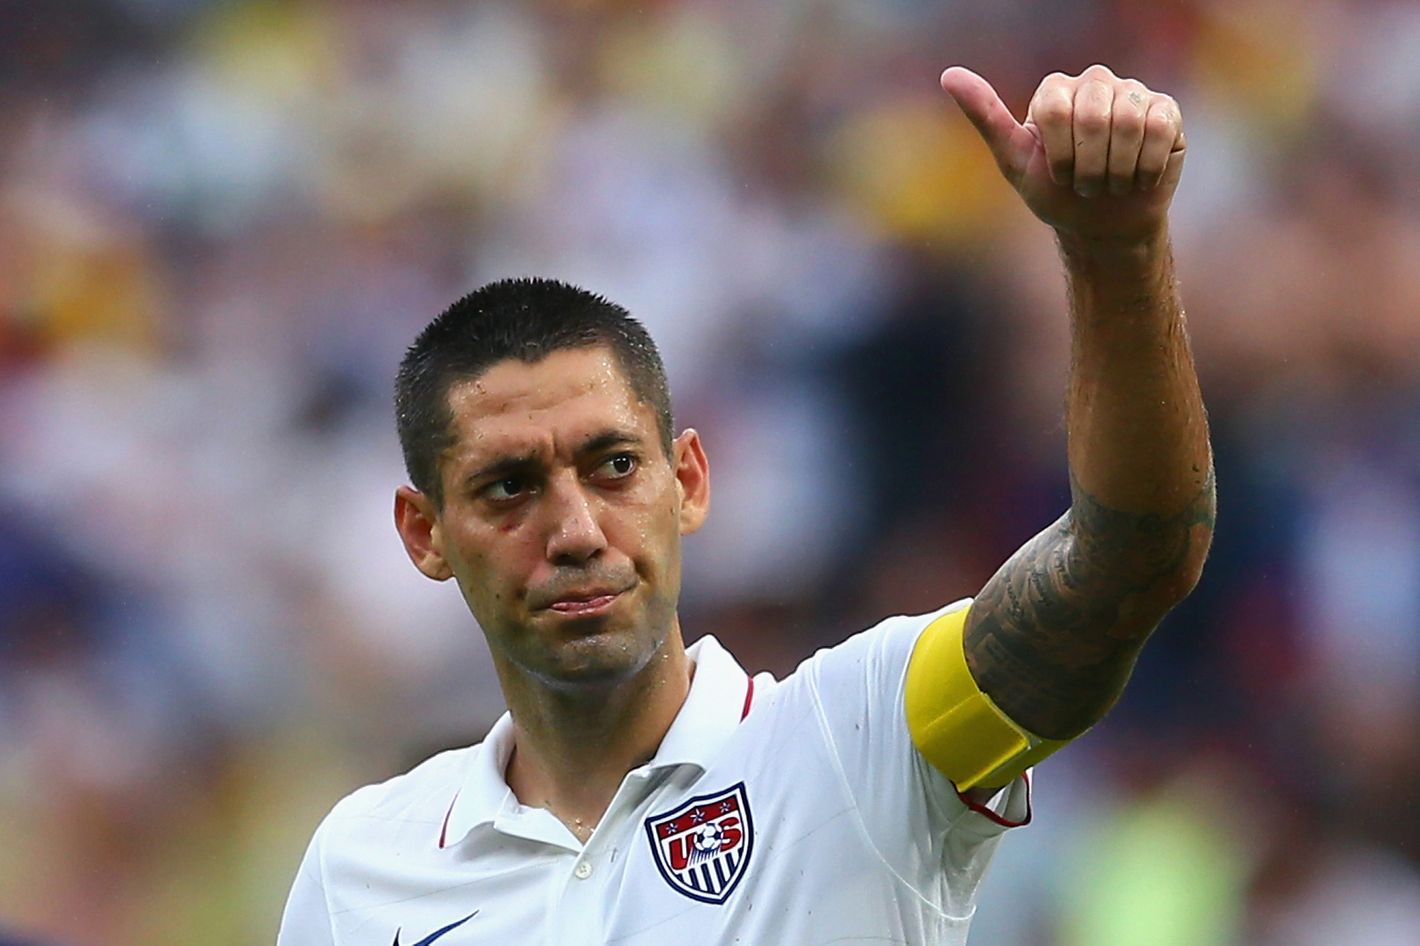 Today's U.S.-Belgium World Cup Match: A Primer for the Vaguely